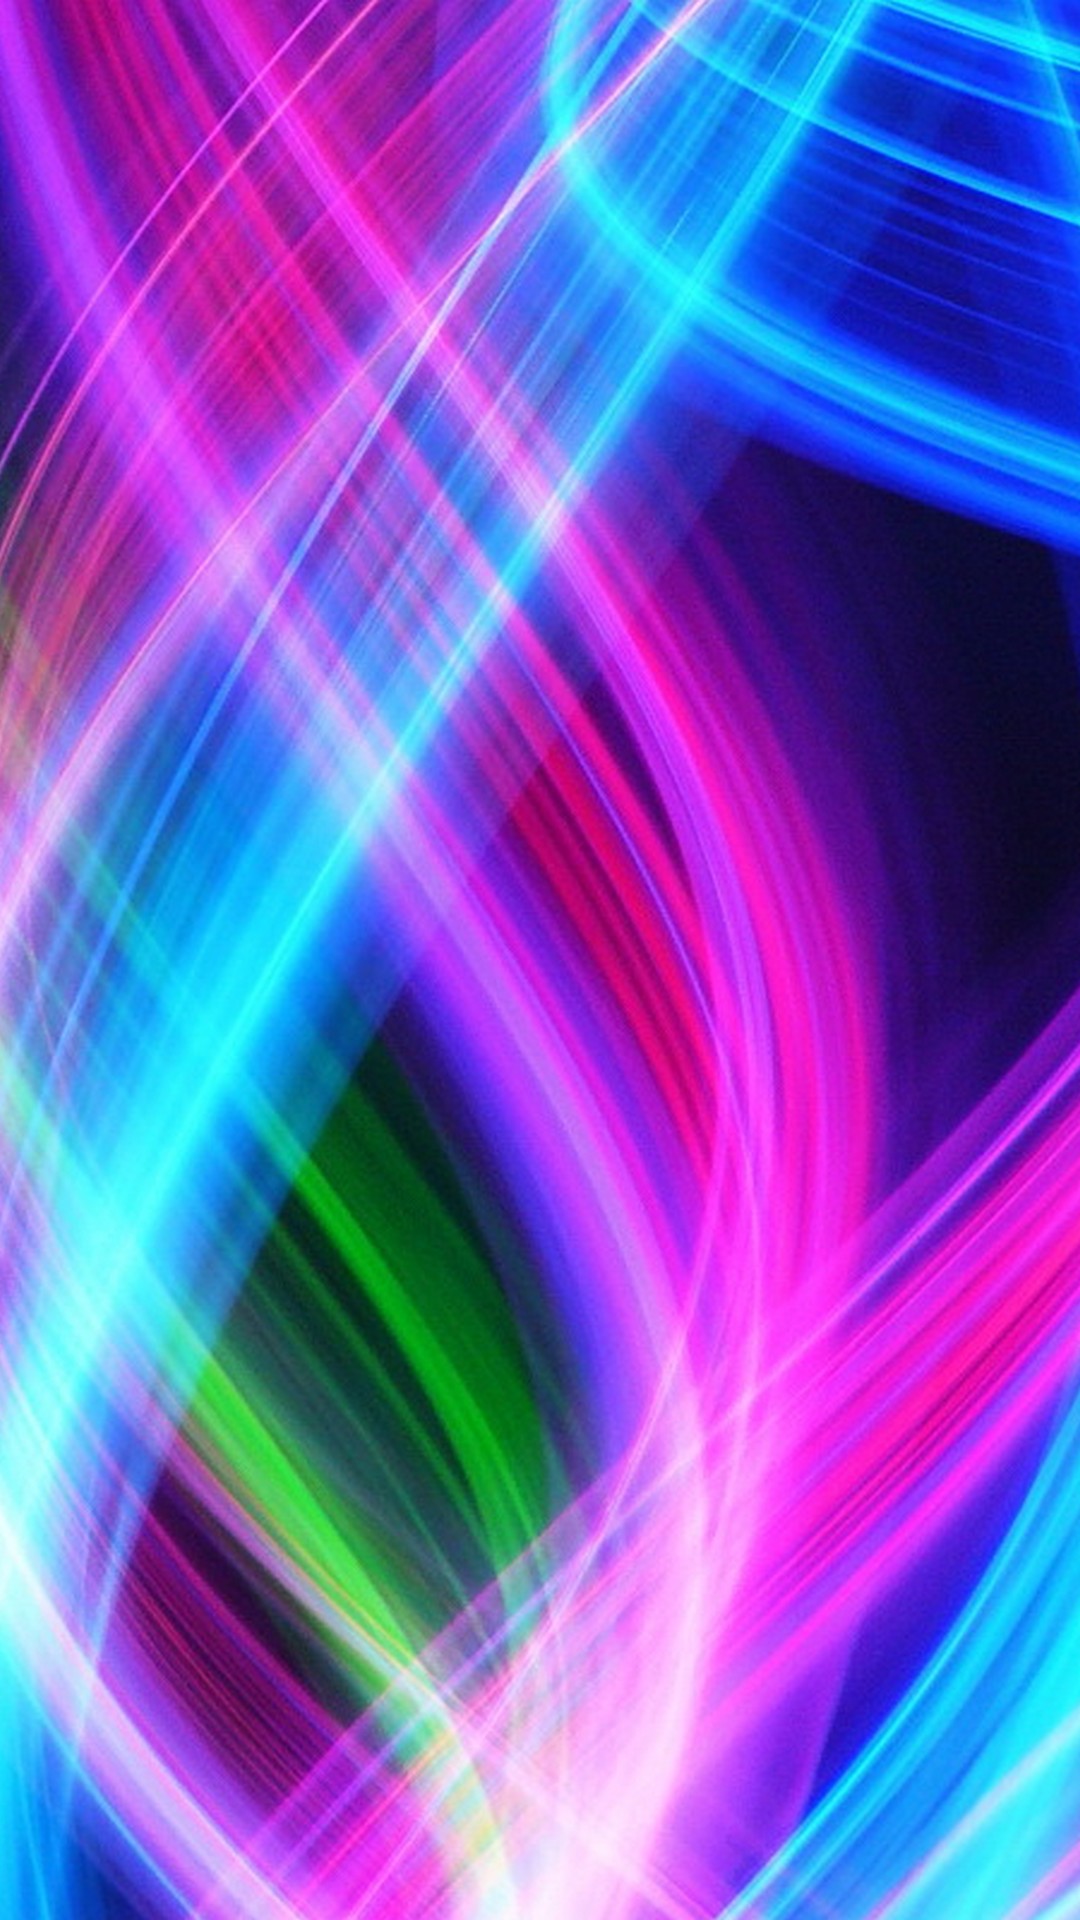 Light Colorful iPhone X Wallpaper With high-resolution 1080X1920 pixel. You can use this wallpaper for your iPhone 5, 6, 7, 8, X, XS, XR backgrounds, Mobile Screensaver, or iPad Lock Screen